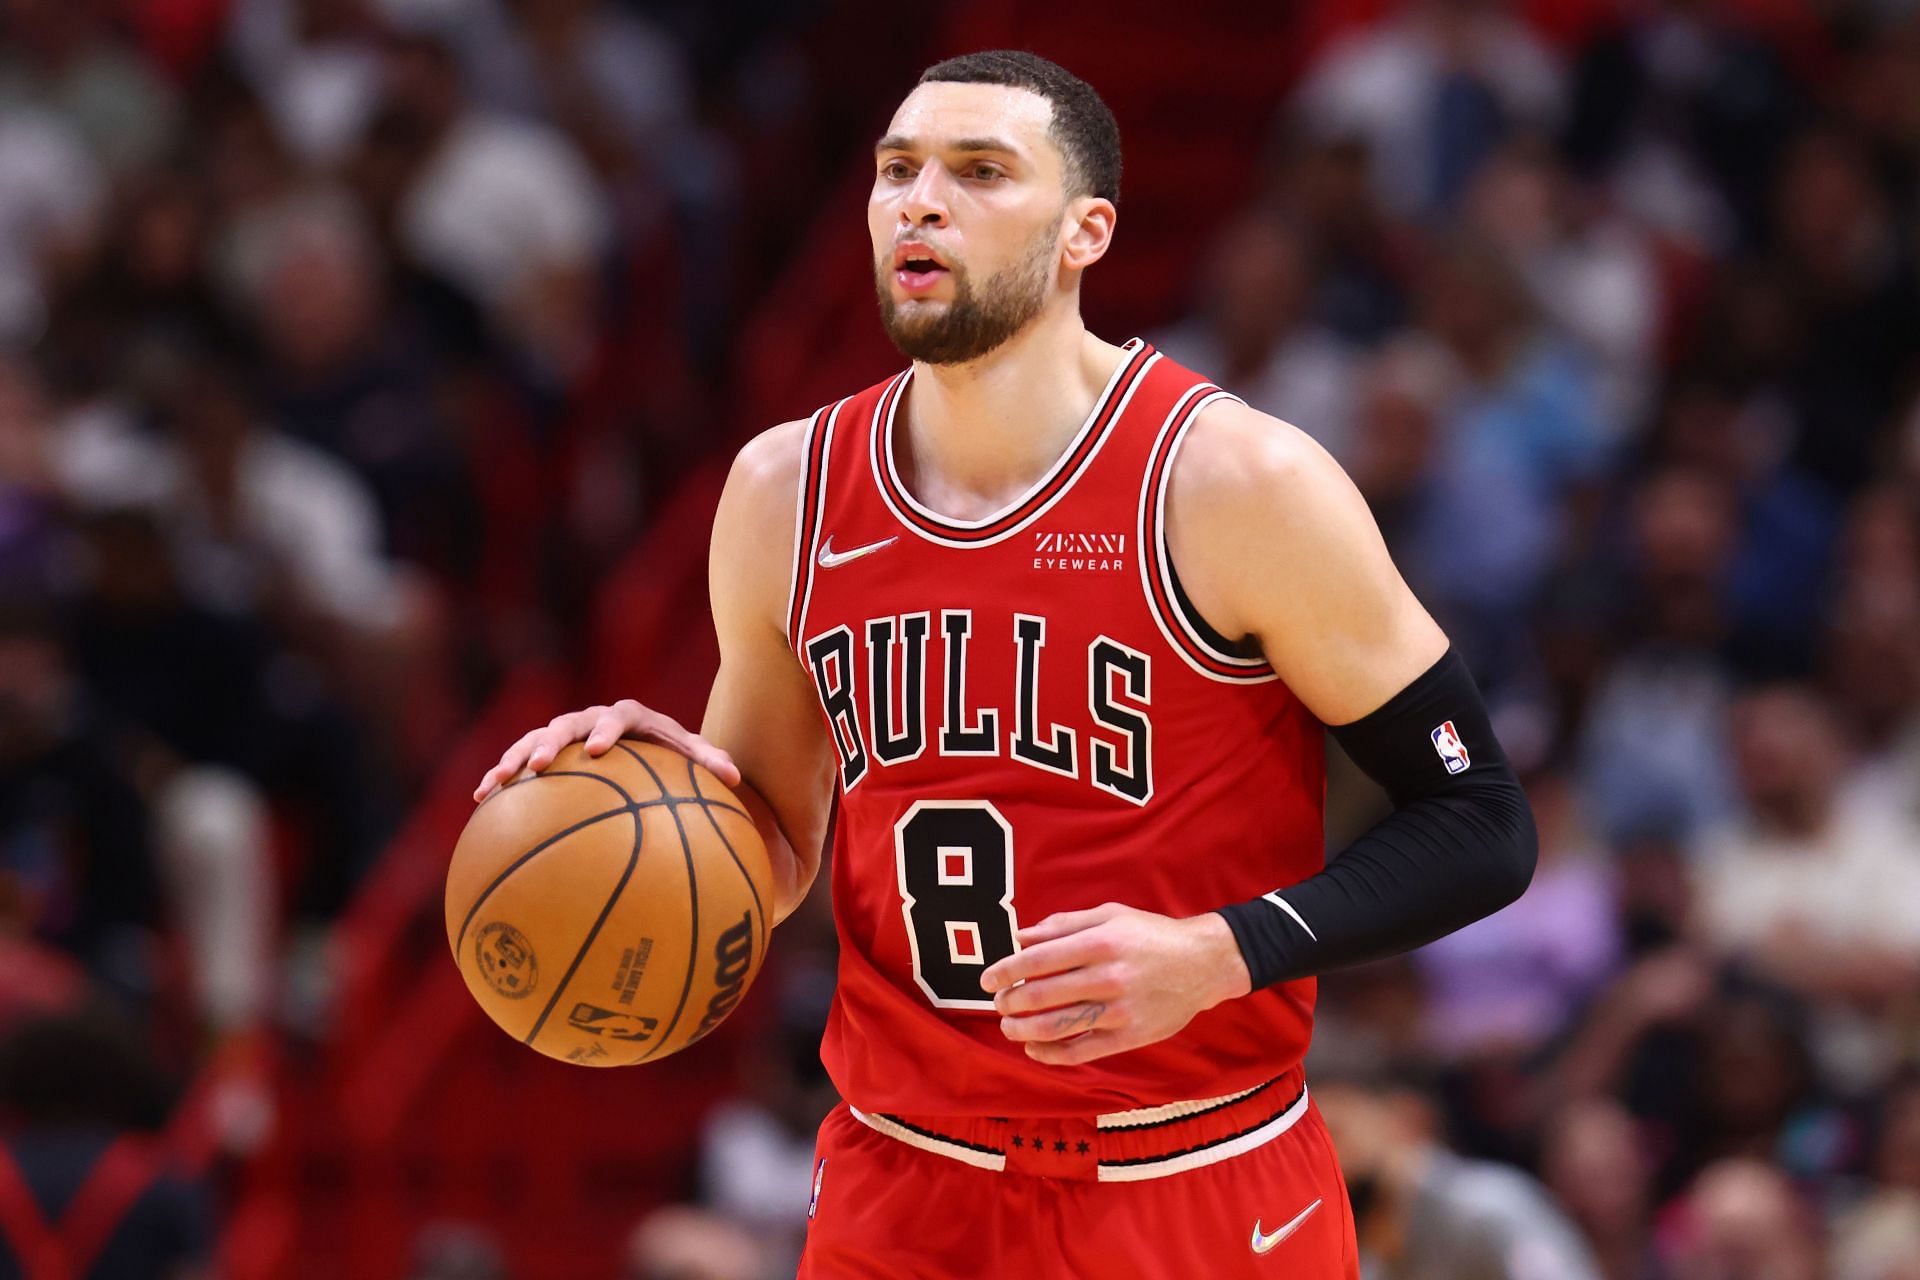 Zach LaVine #8 of the Chicago Bulls dribbles up the court against the Miami Heat during the second half at FTX Arena on February 28, 2022 in Miami, Florida.